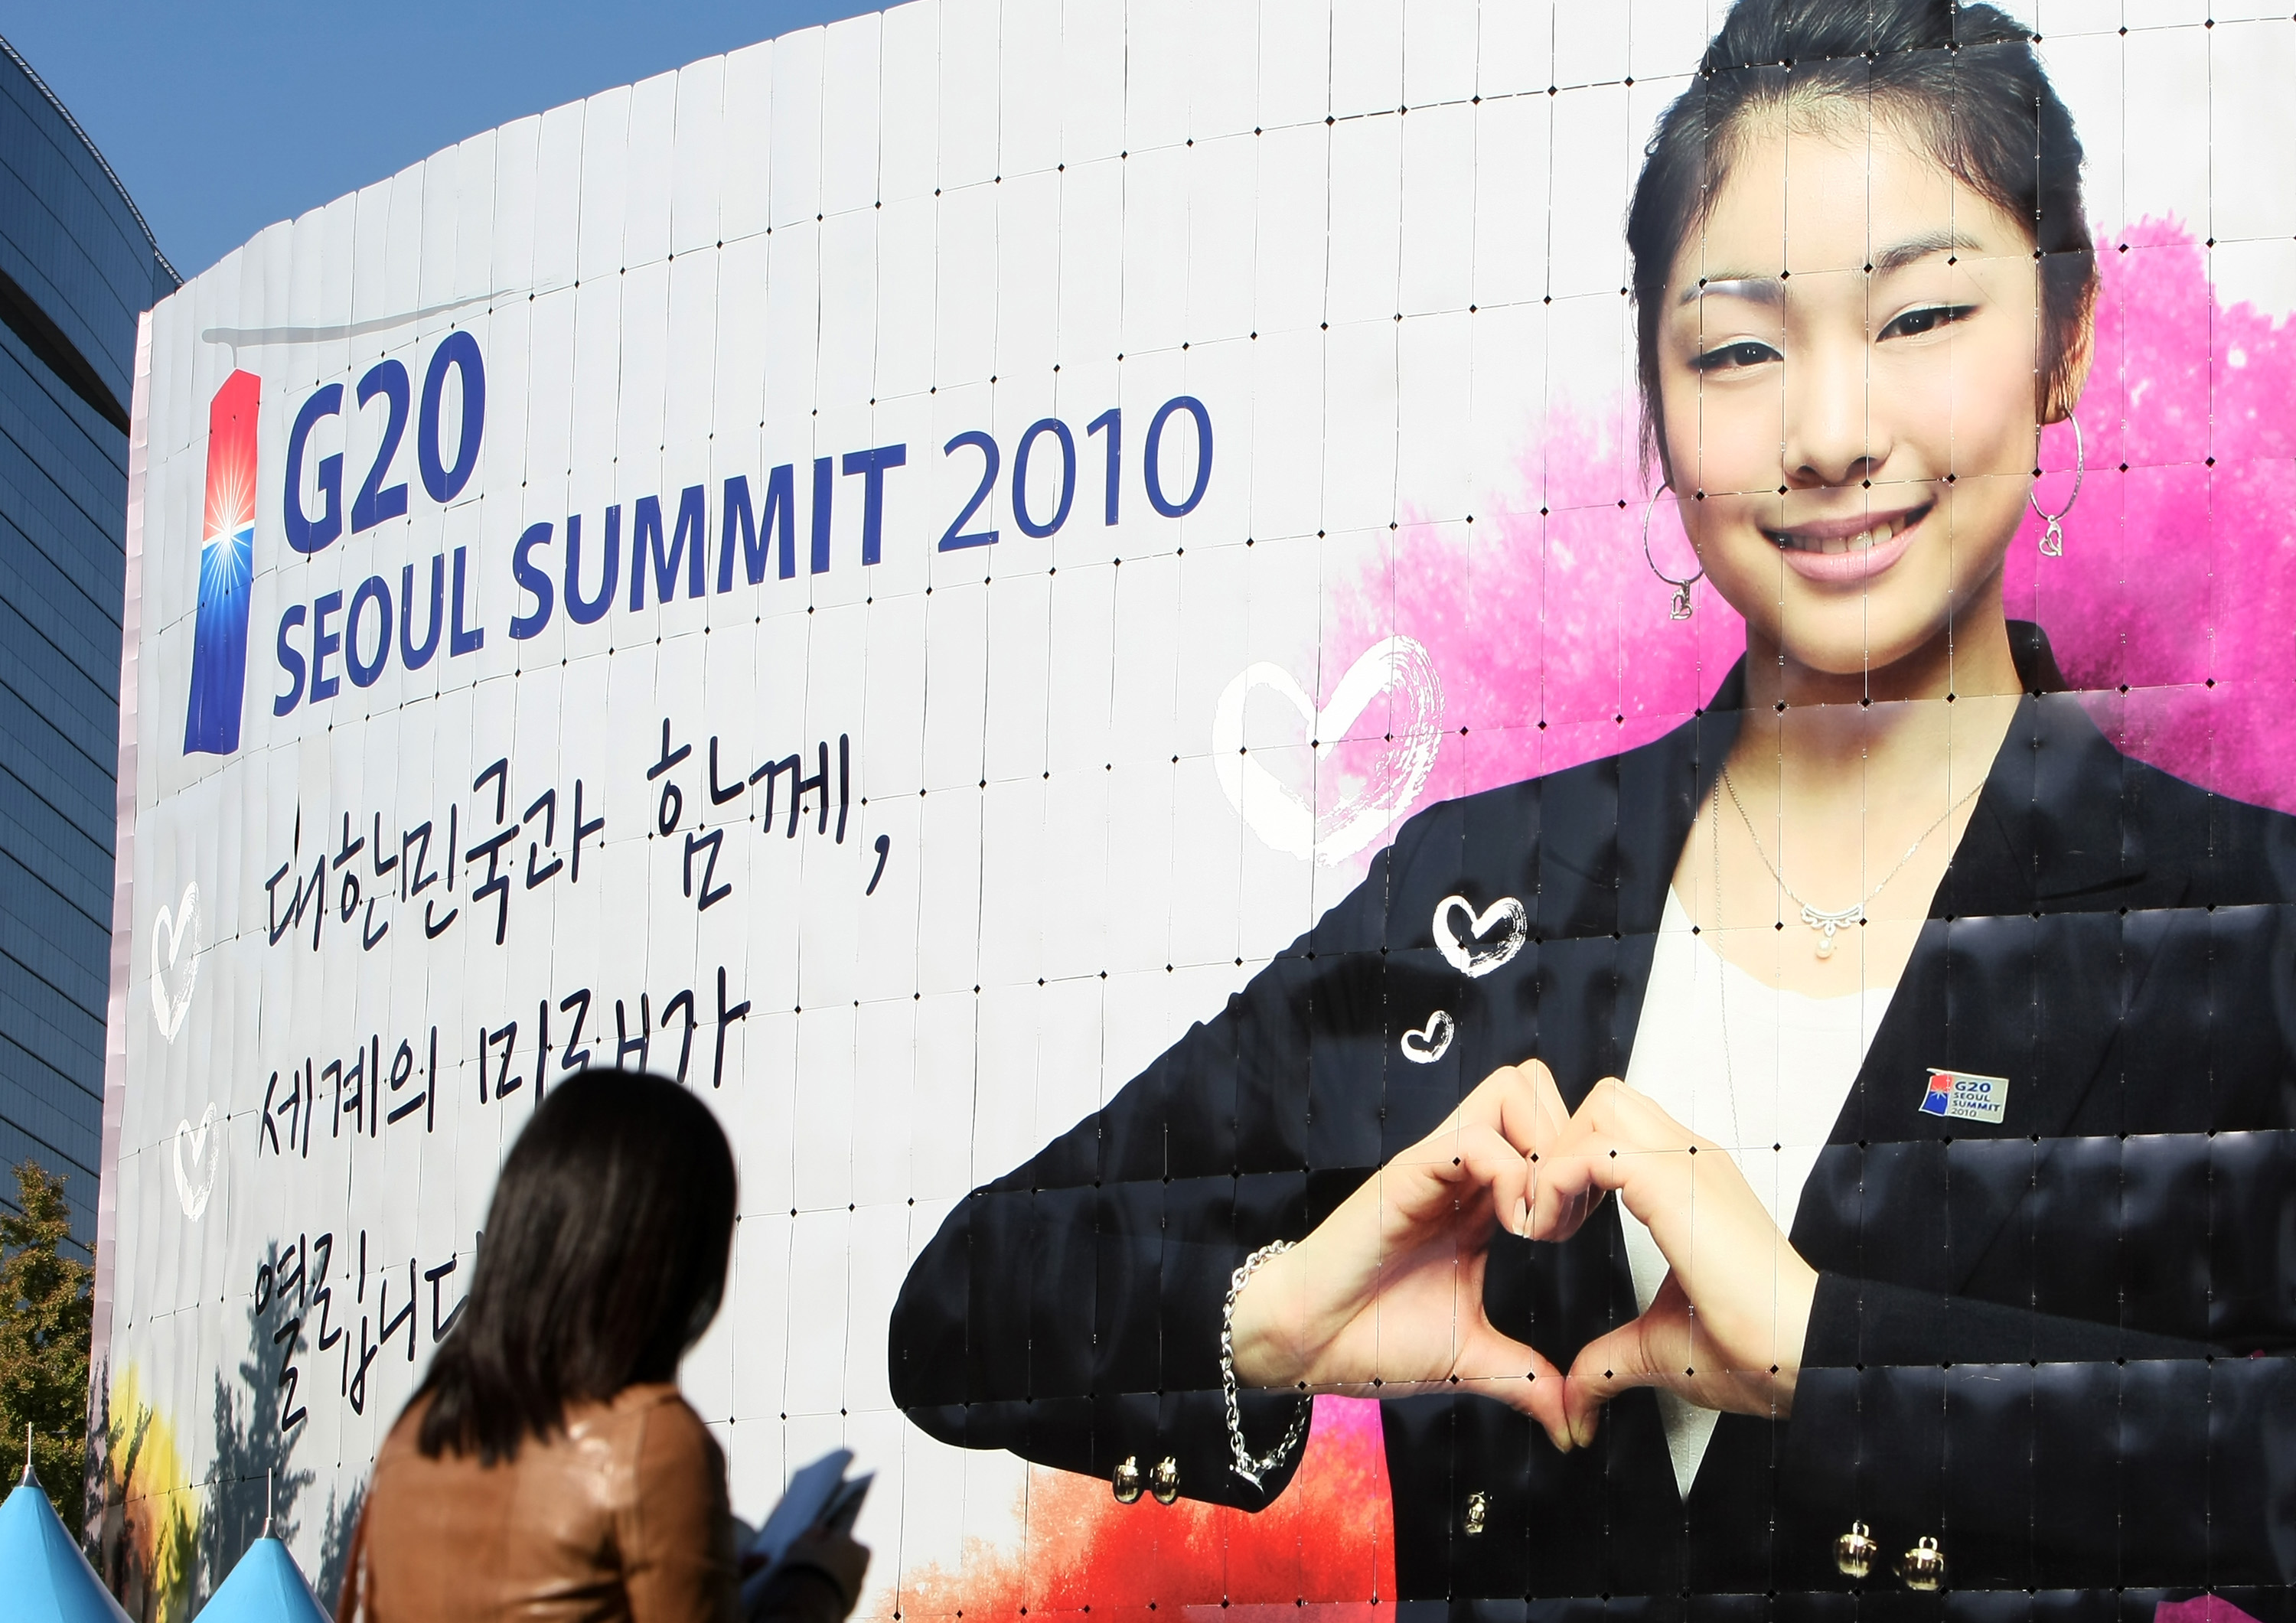 Pedestrians walk past Seoul City Hall, which is covered with a billboard showing a picture of Olympic figure skating gold medalist Kim Yuna, for the Group of 20 (G-20) summit in Seoul, South Korea, on Saturday, Oct. 30, 2010. Photographer: SeongJoon Cho/Bloomberg via Getty Images (Bloomberg&mdash;Bloomberg via Getty Images)